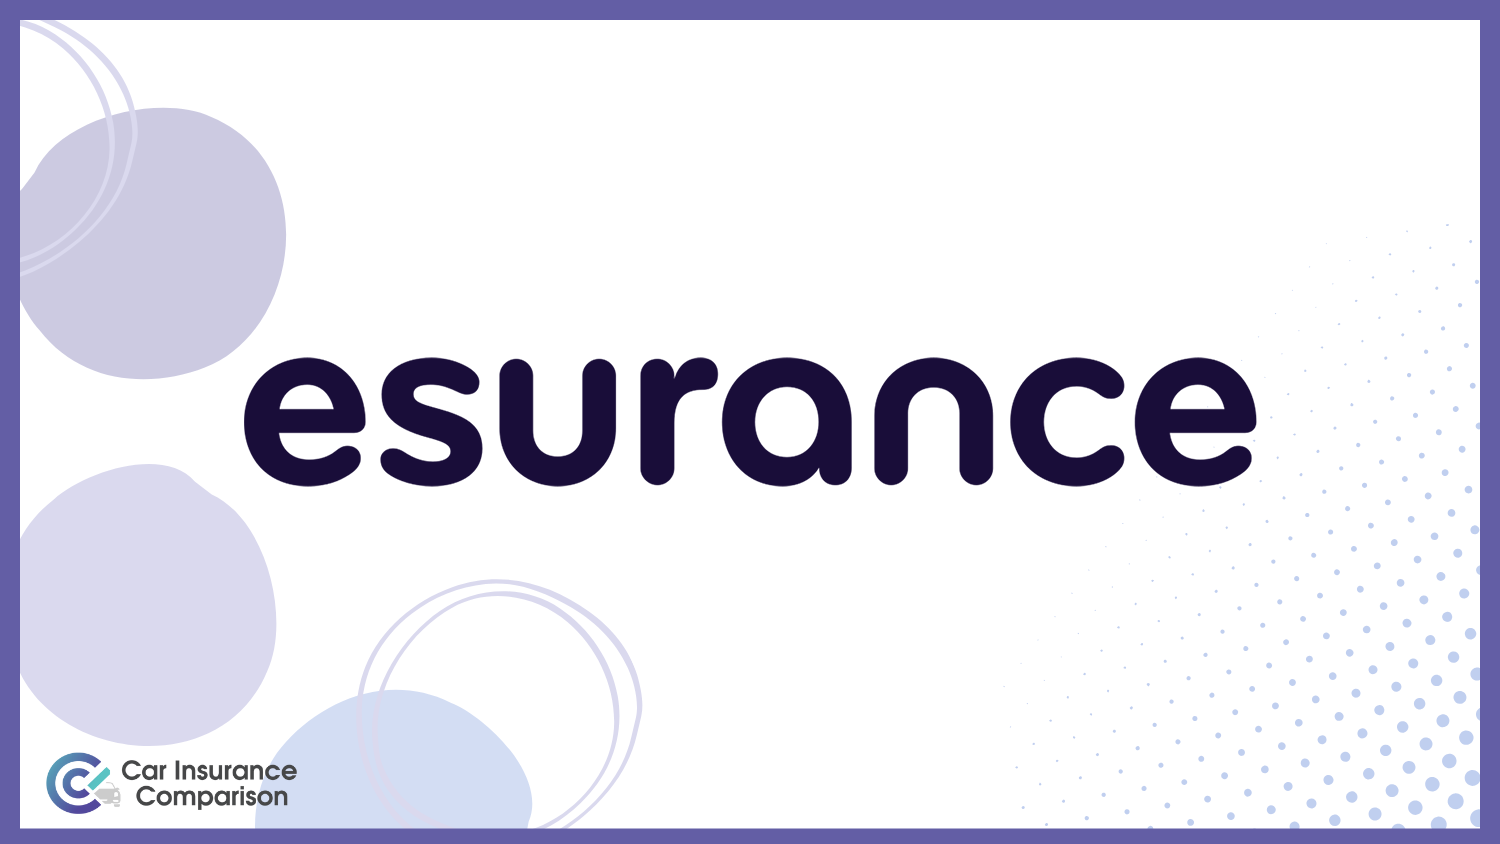 Esurance: Best Car Insurance for Home-Care Worker